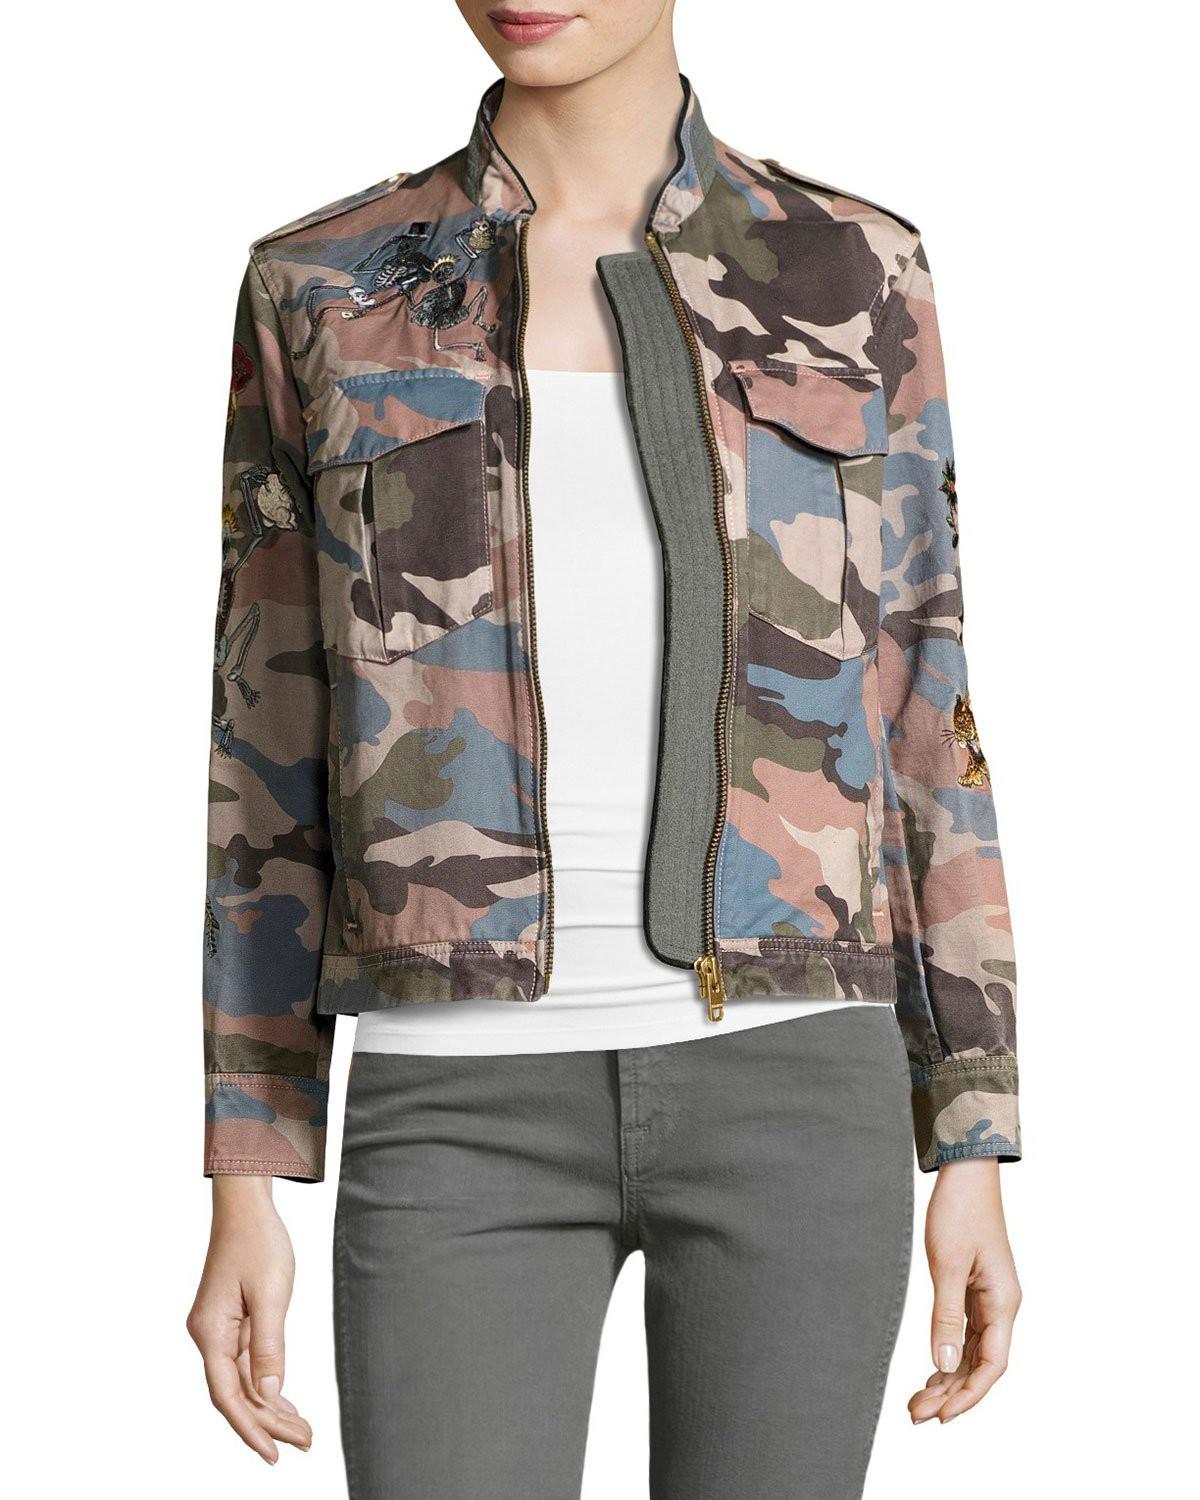 Zadig & Voltaire Kavy Embroidered Camo Utility Jacket | ModeSens